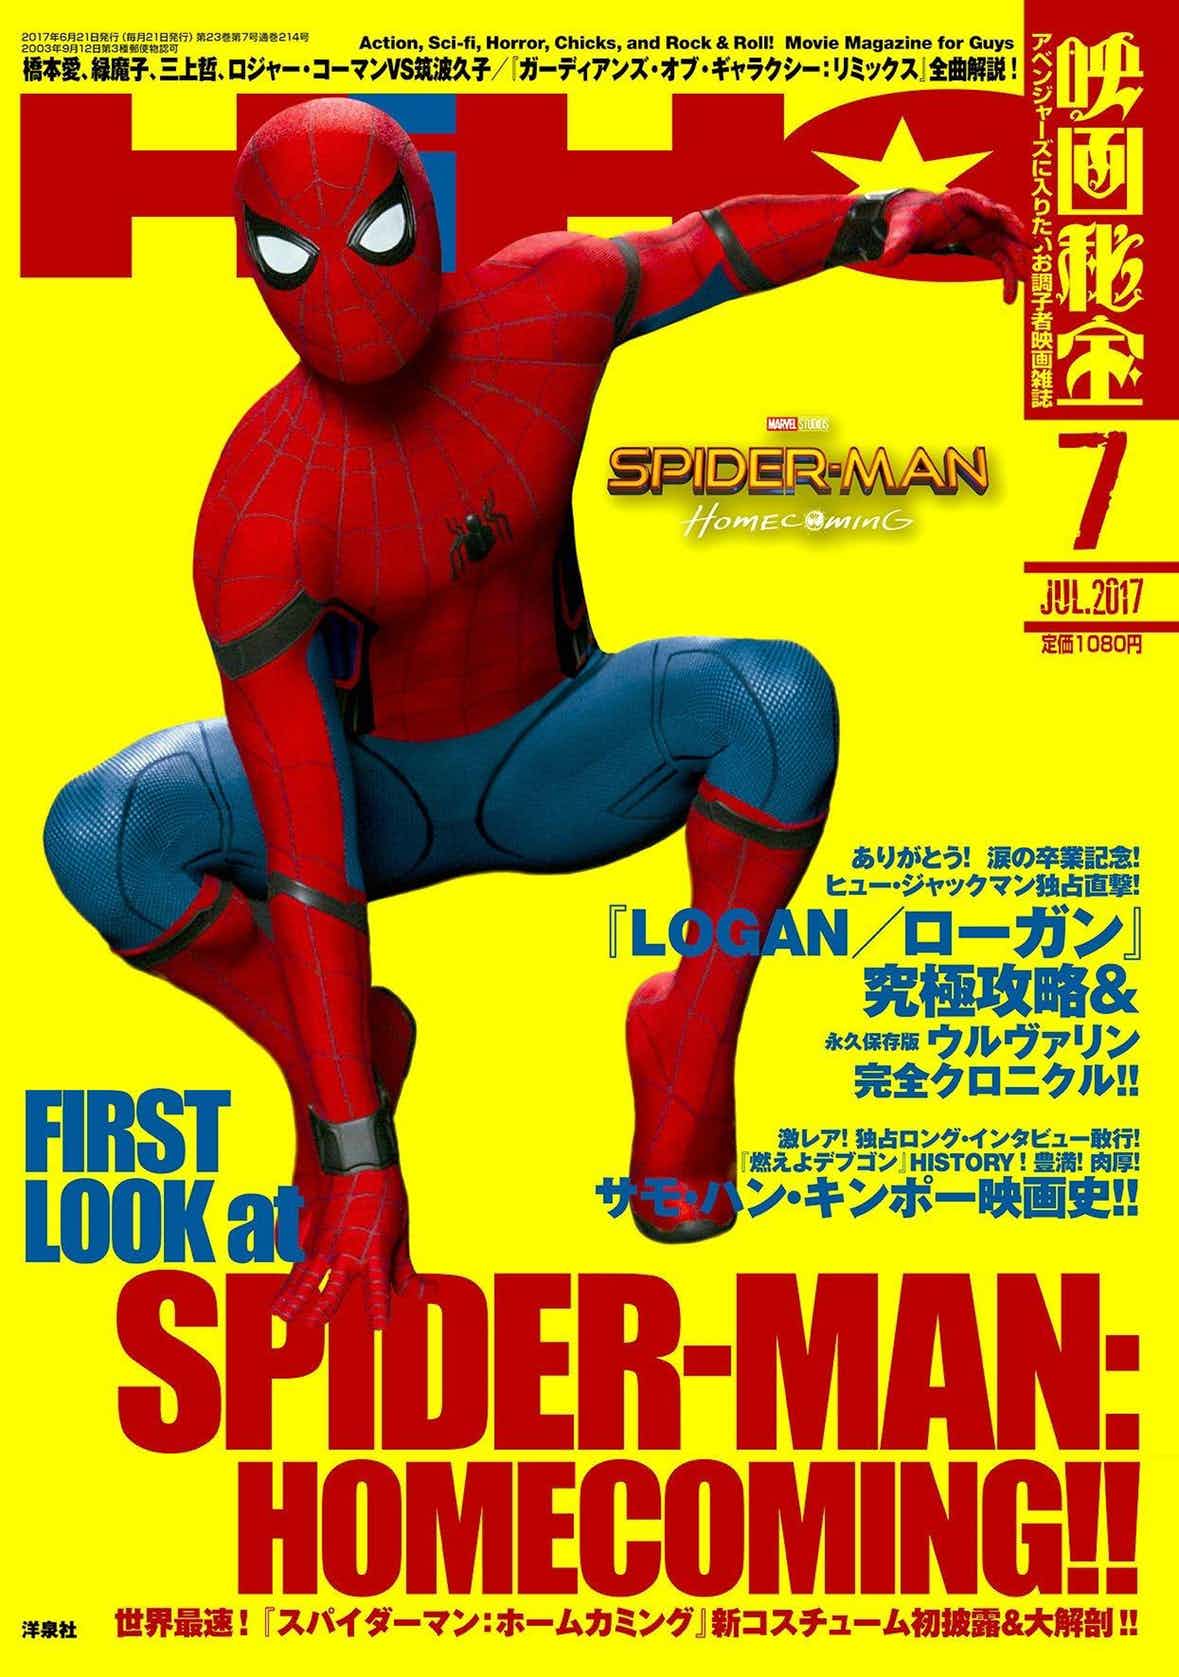 tom holland spider-man homecoming cover